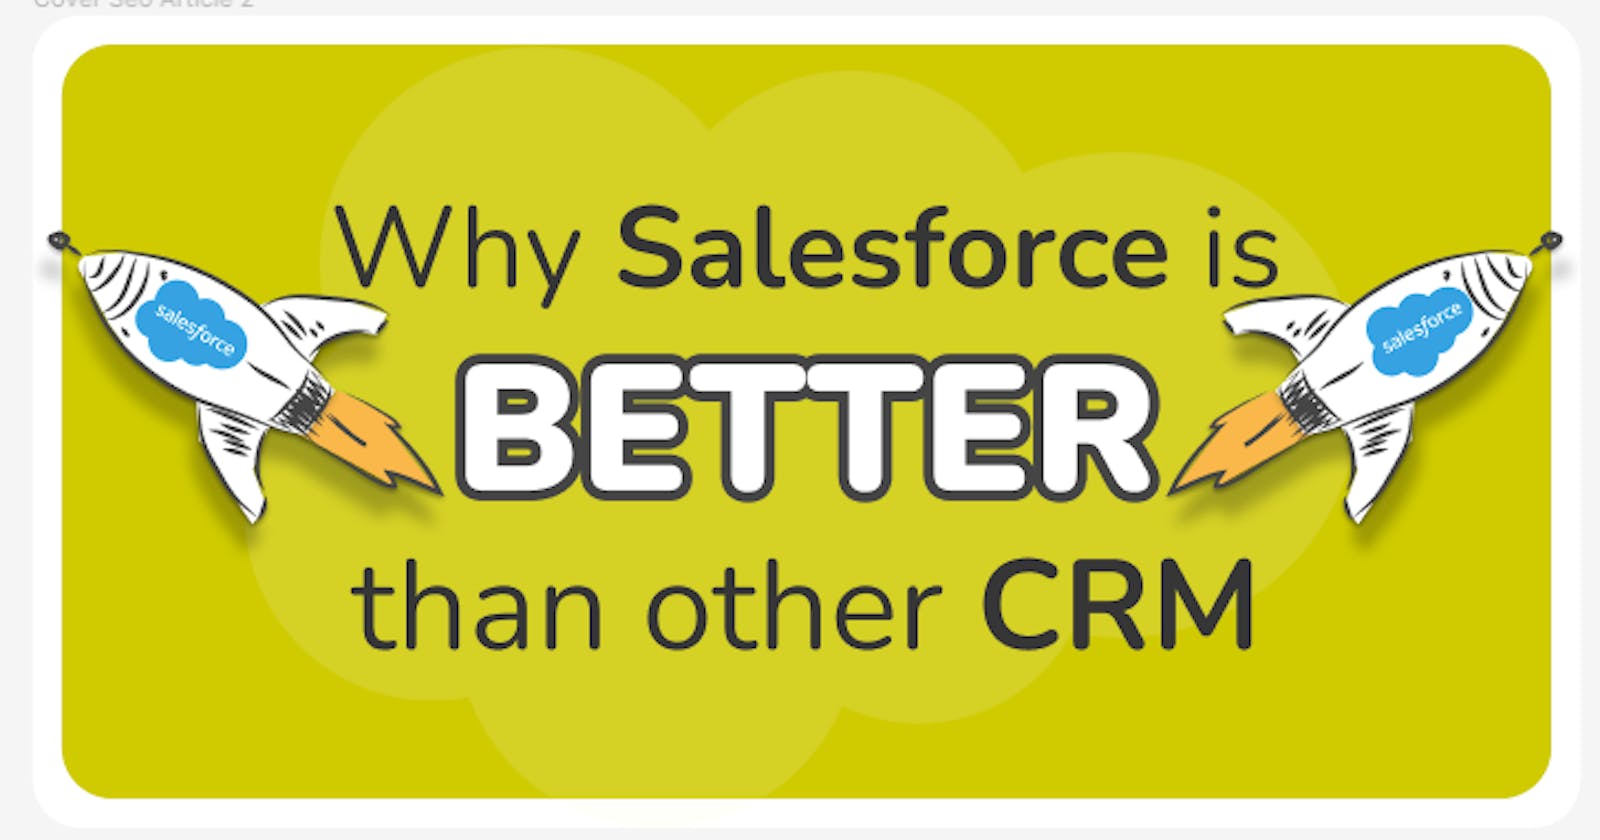 Why Salesforce is Better than other CRM